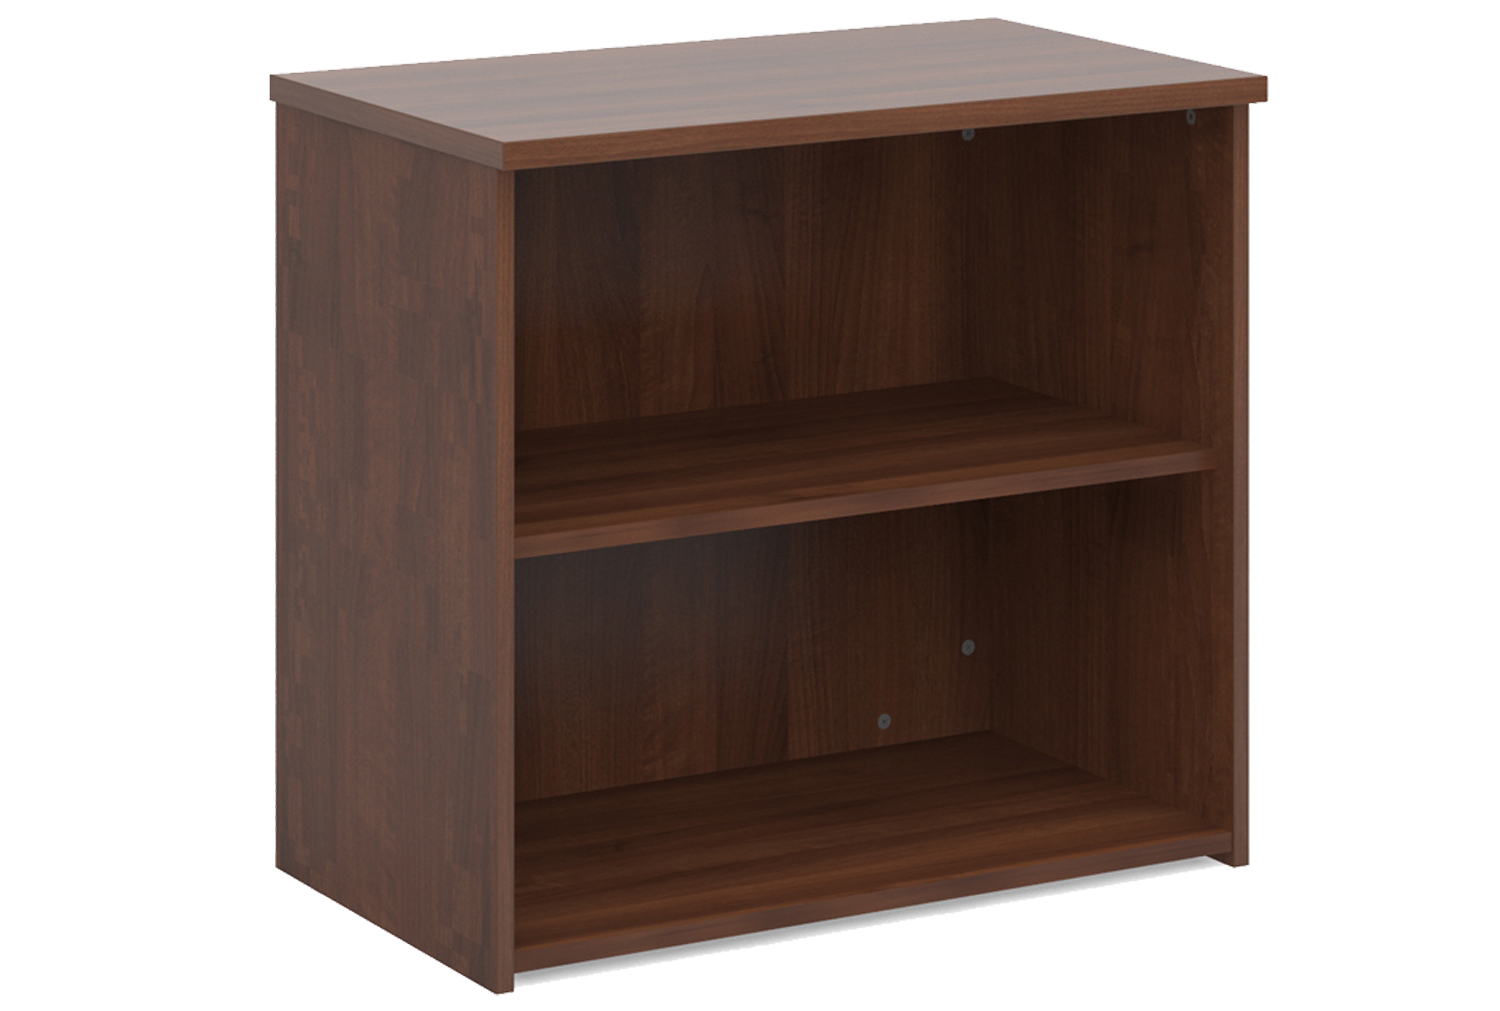 All Walnut Office Bookcases, 1 Shelf - 80wx47dx74h (cm), Express Delivery